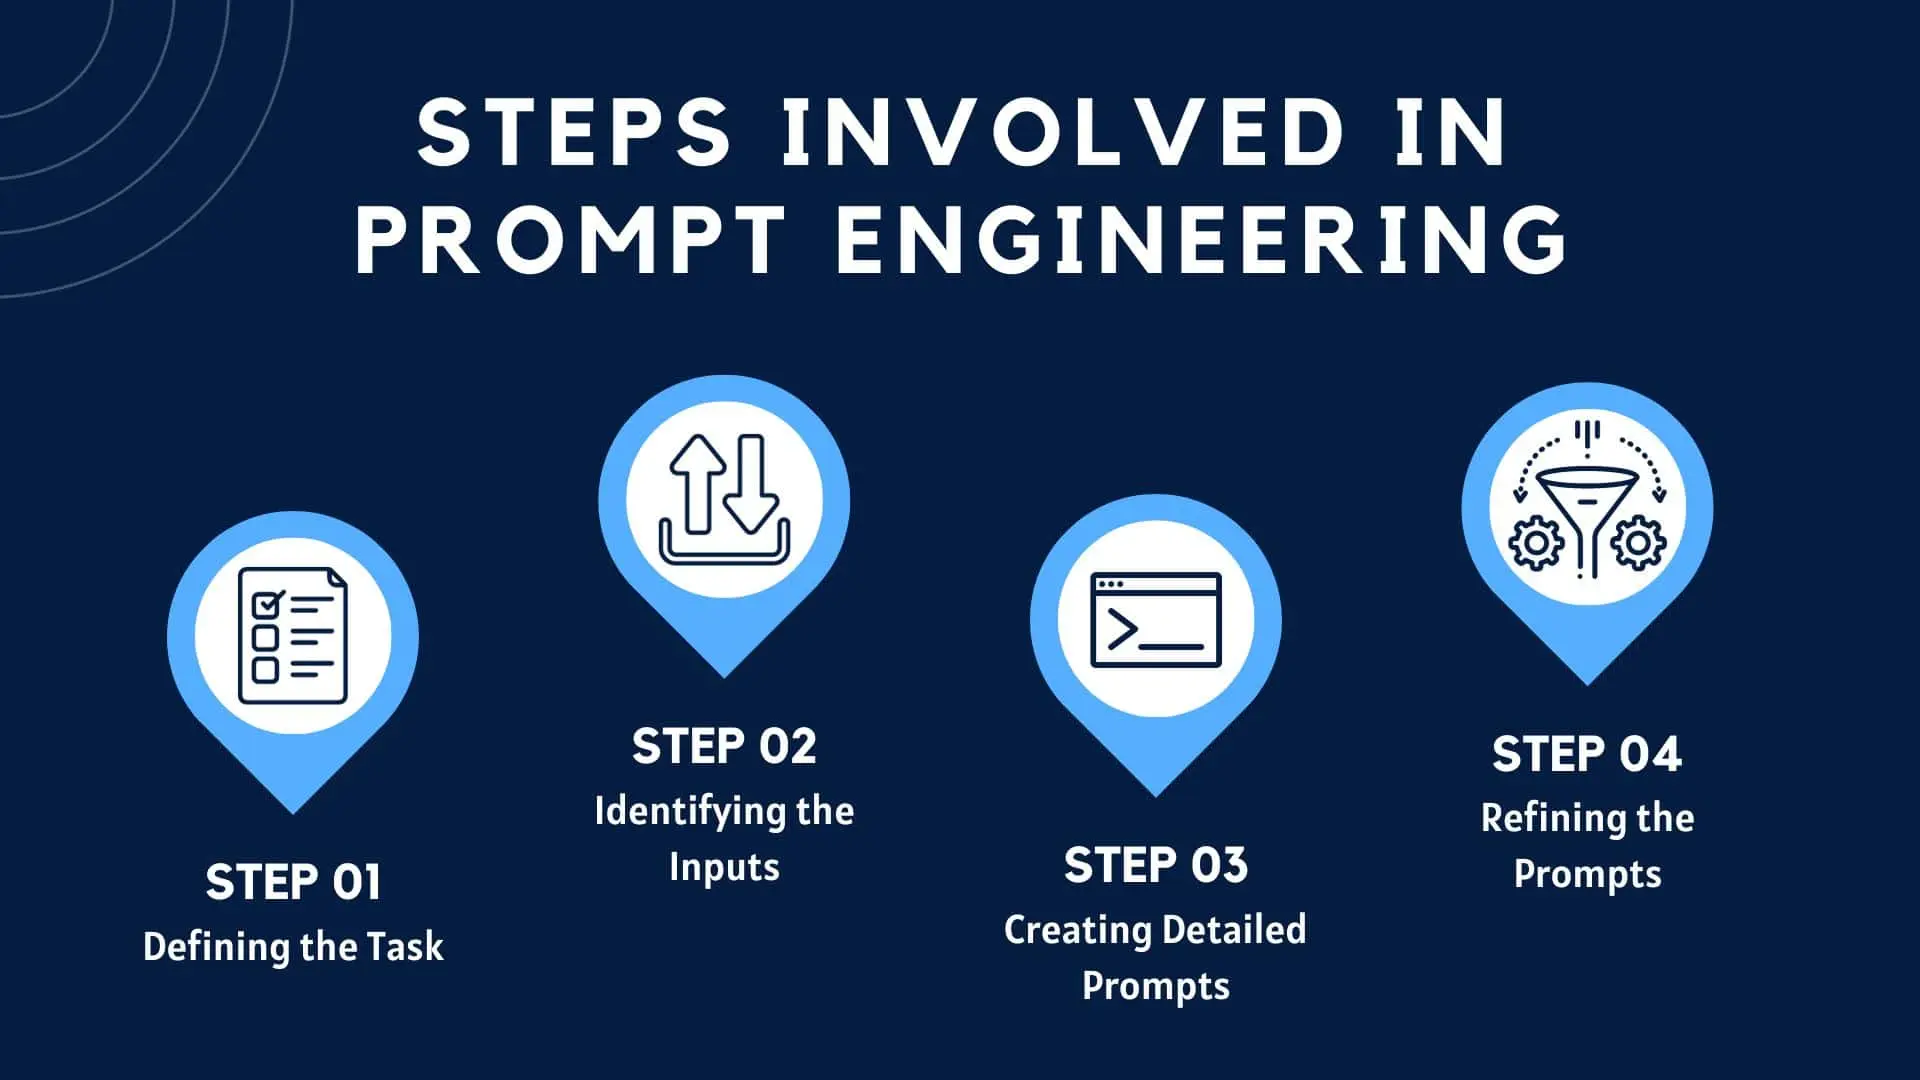 How Does Prompt Engineering Work: A Step-by-Step Guide